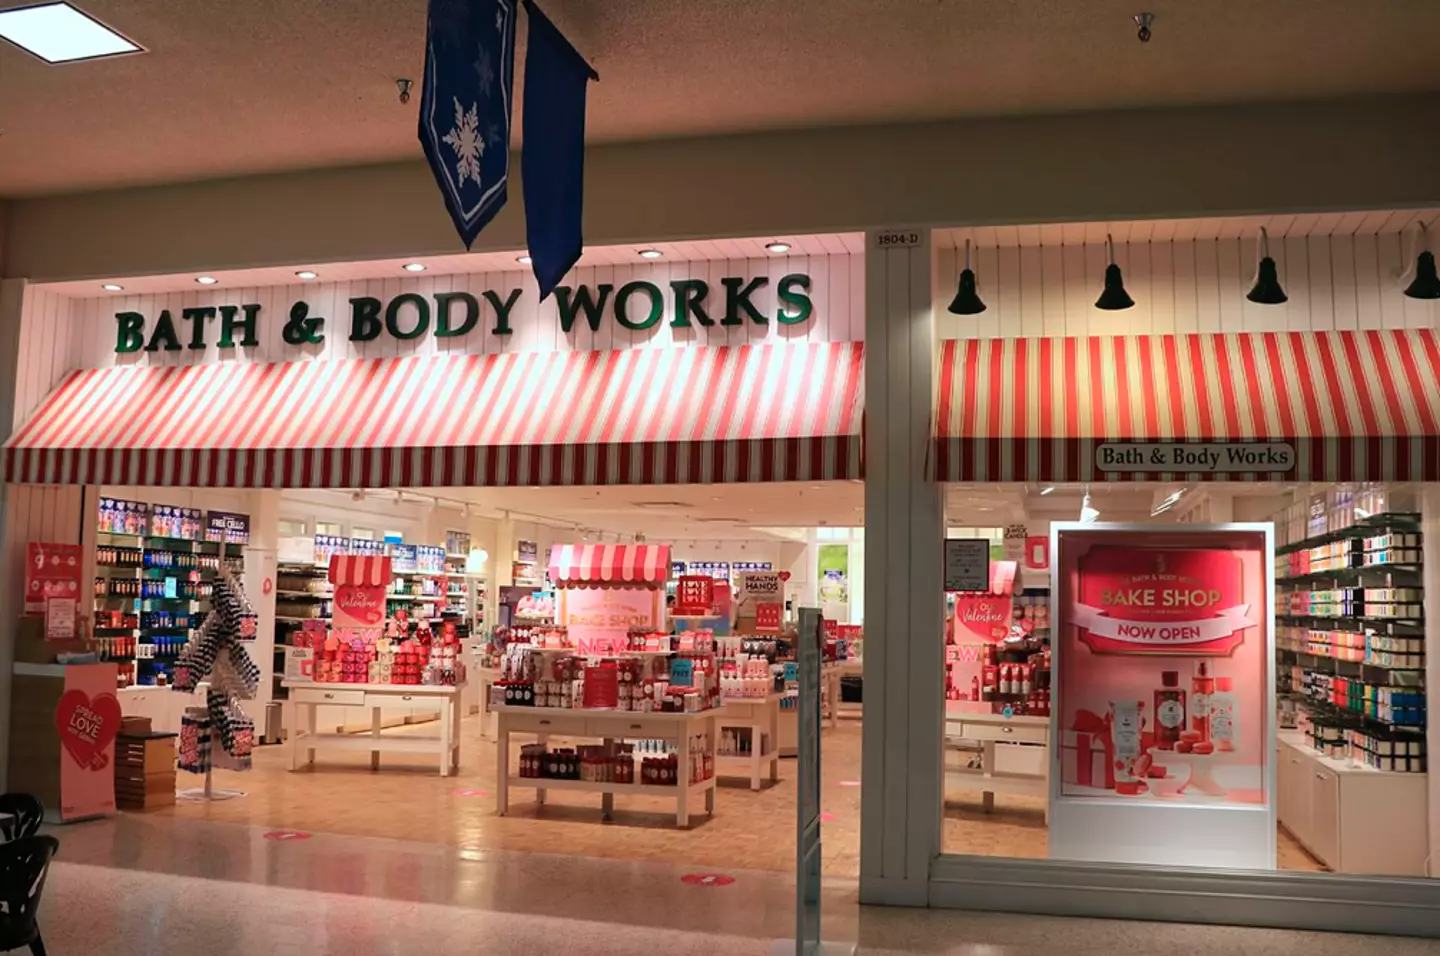 Bath & Body Works has over 1500 stores in the US.